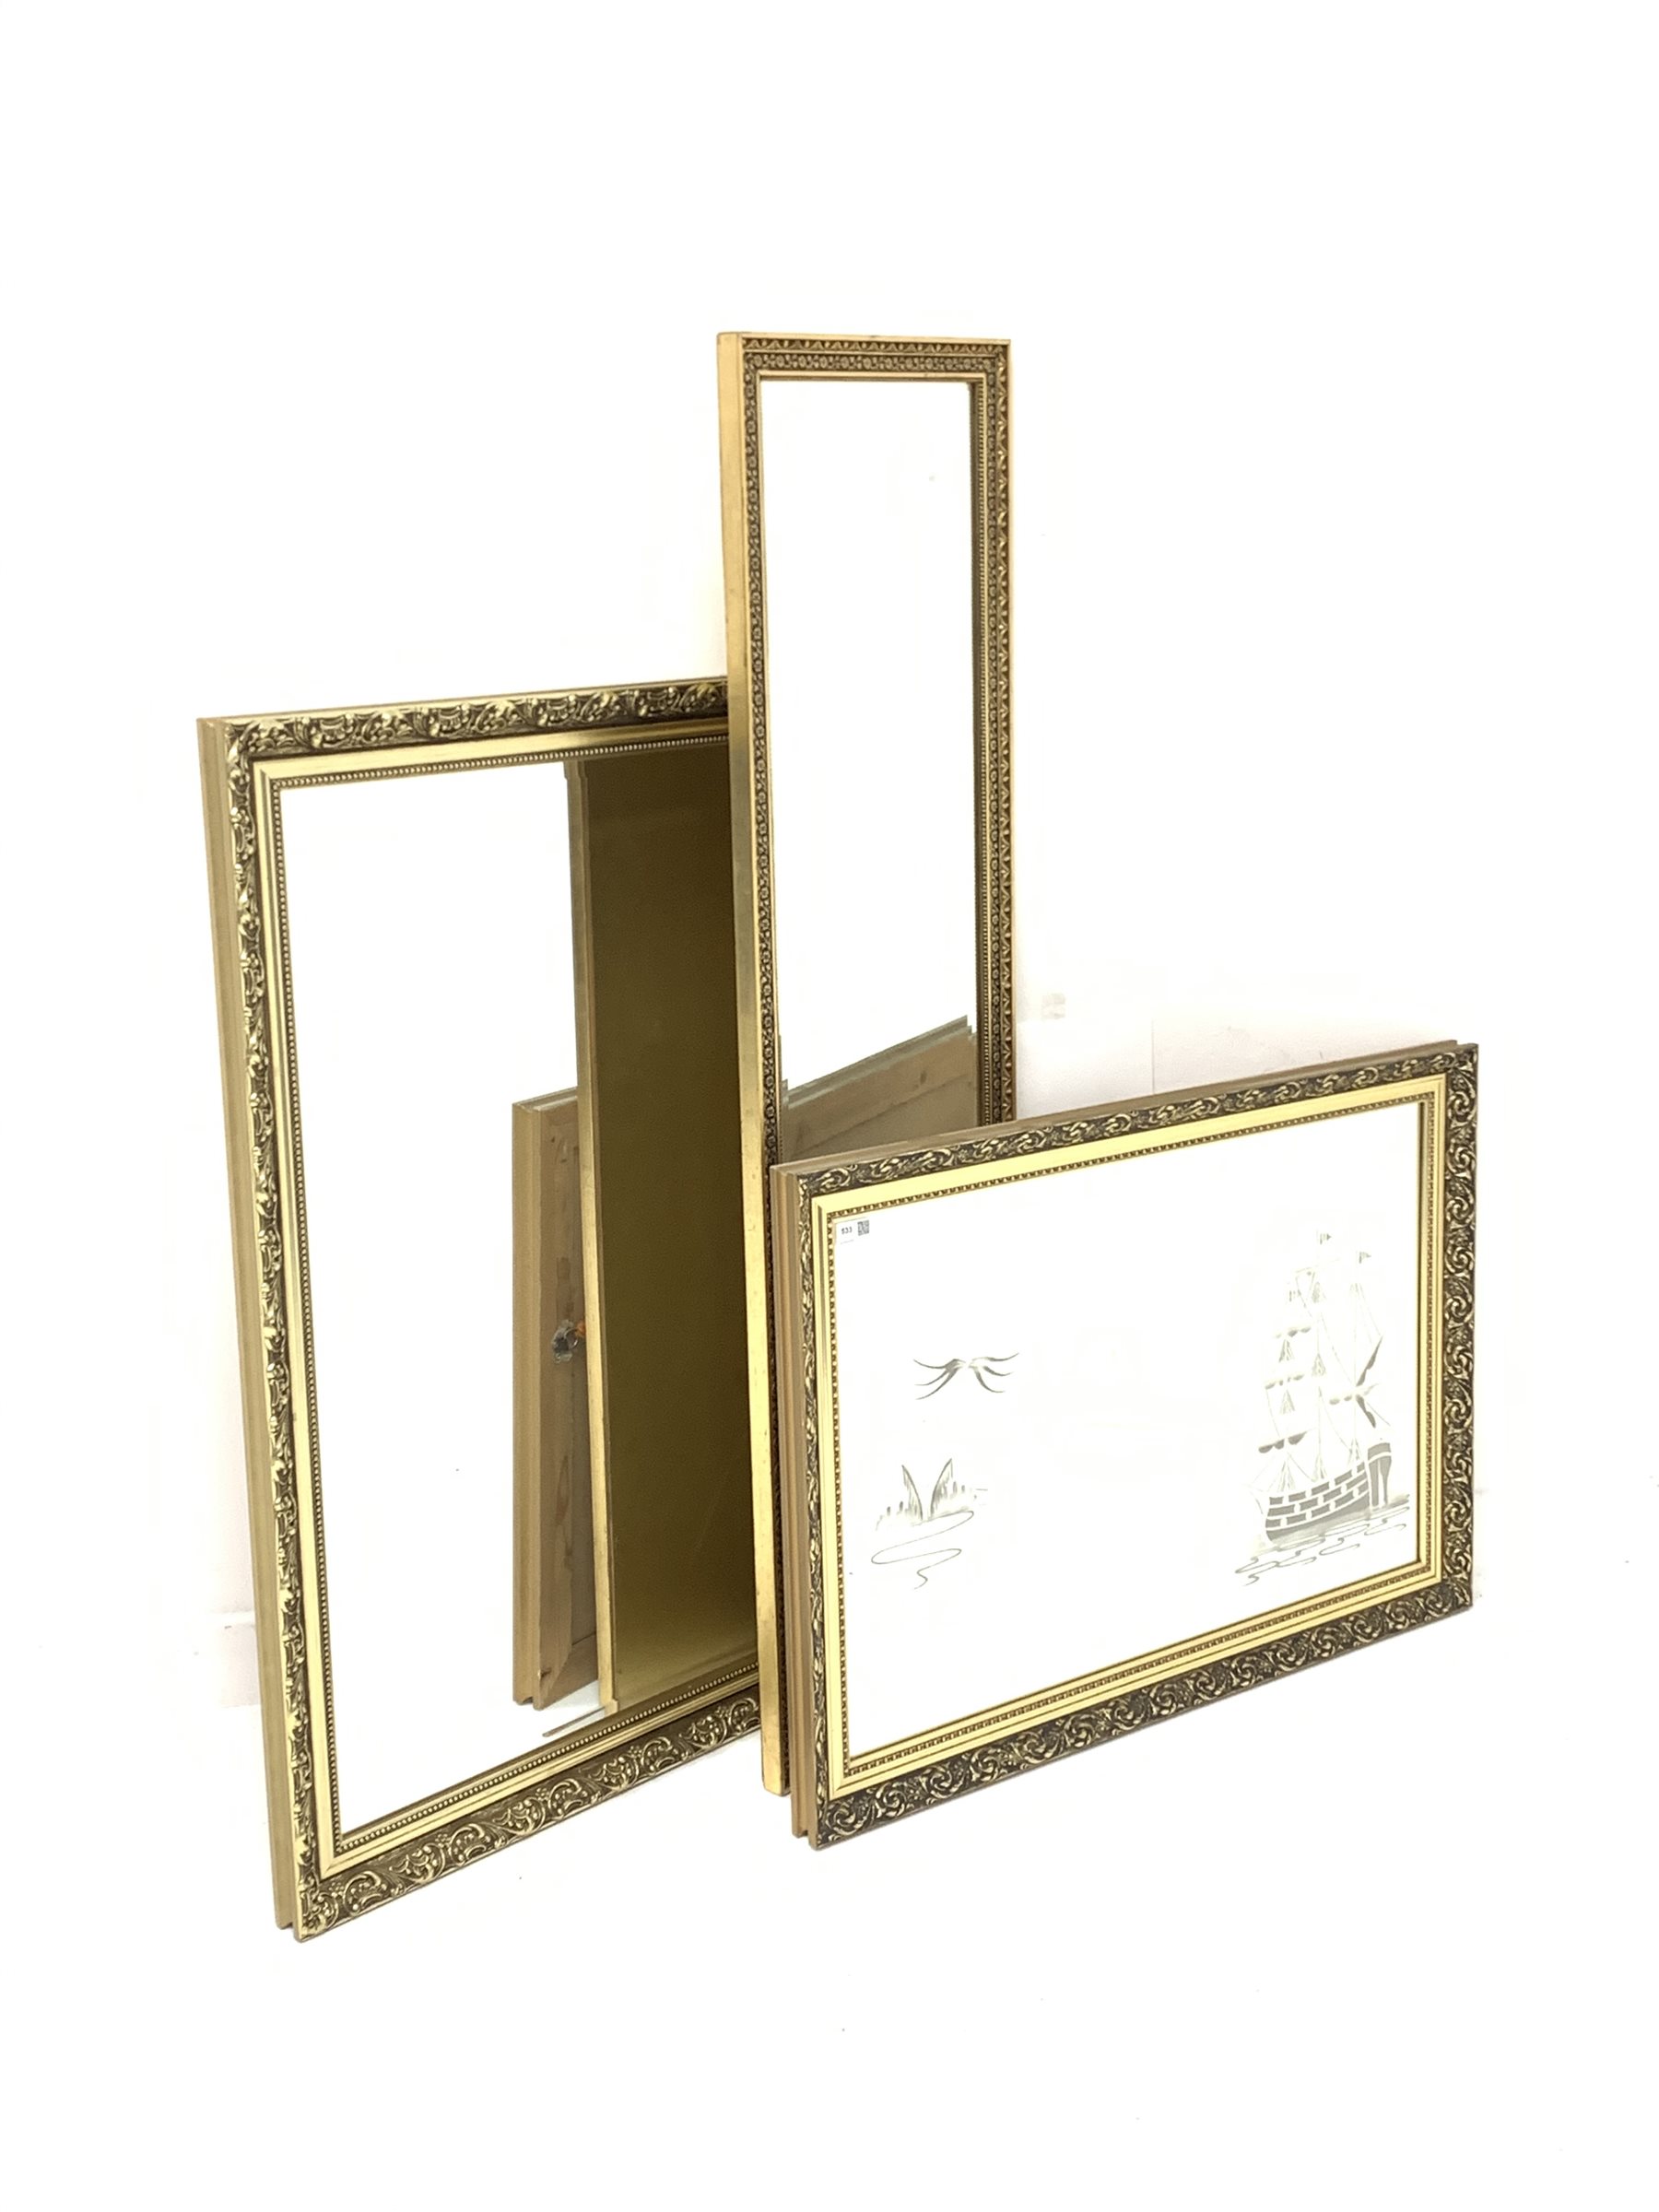 Nautical themed mirror in ornate gilt frame (87cm x 61cm) another similar mirror (101cm x 71cm) and - Image 2 of 4